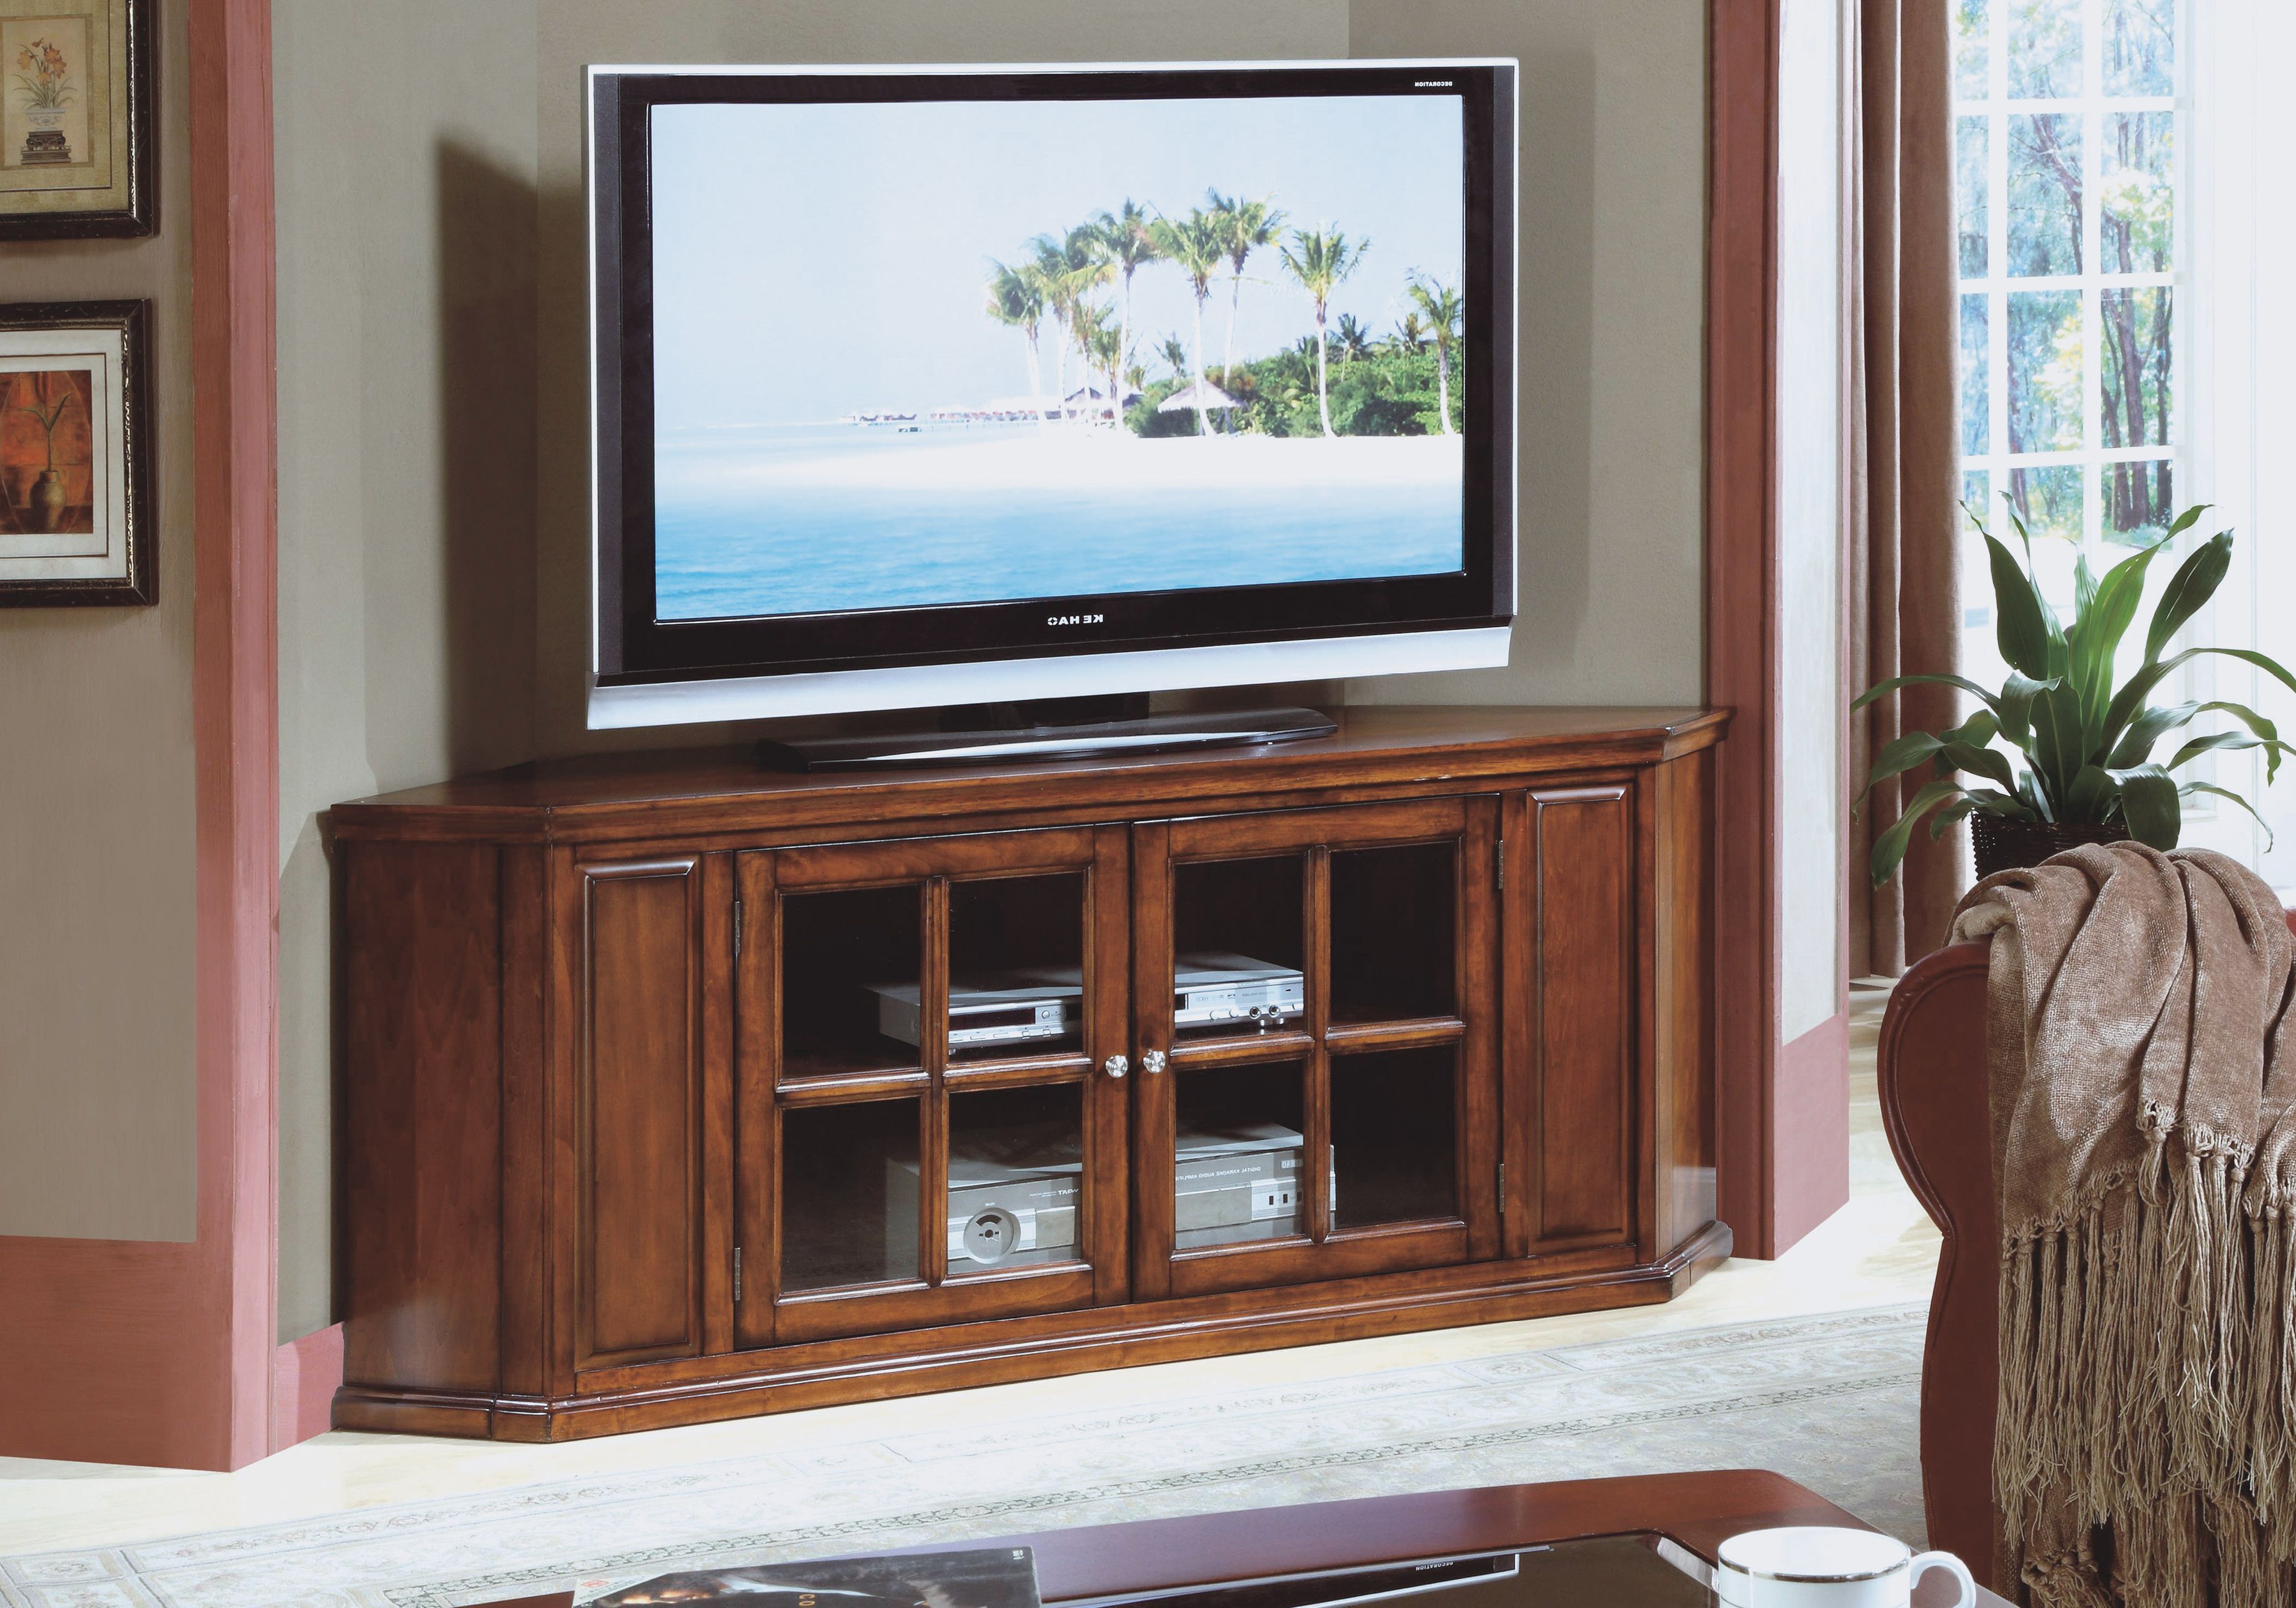 Oak Tv Stand Walmart Solid Wood Stands For Flat Screens Light With Most Up To Date Oak Tv Stands With Glass Doors (View 11 of 20)